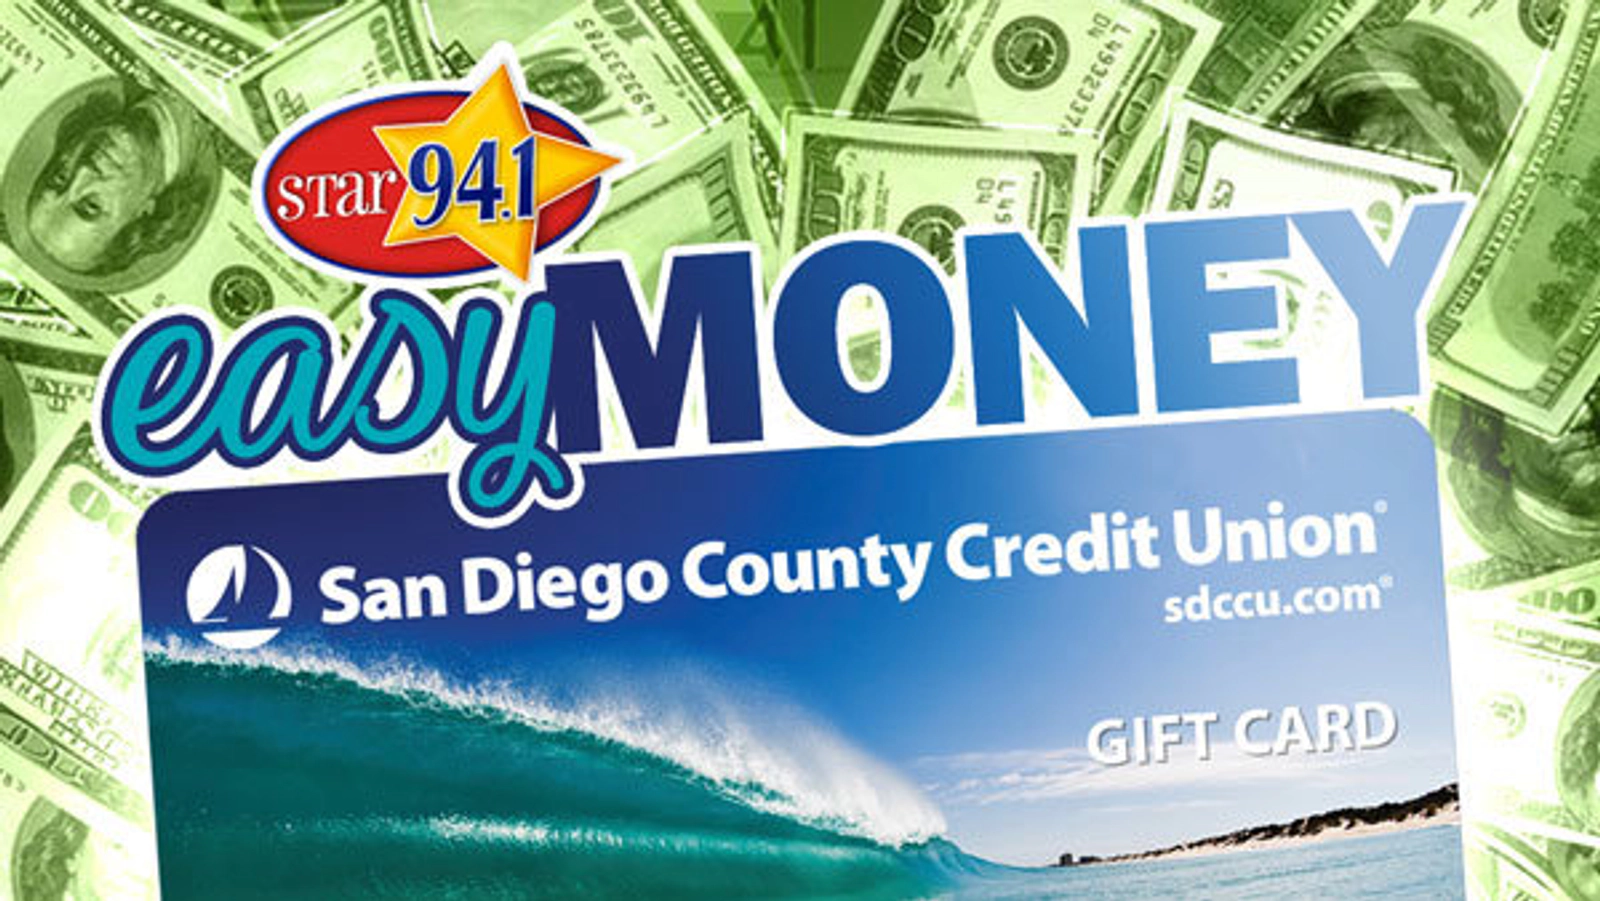   STAR 94.1 Easy Money with SDCCU® - Thumbnail Image